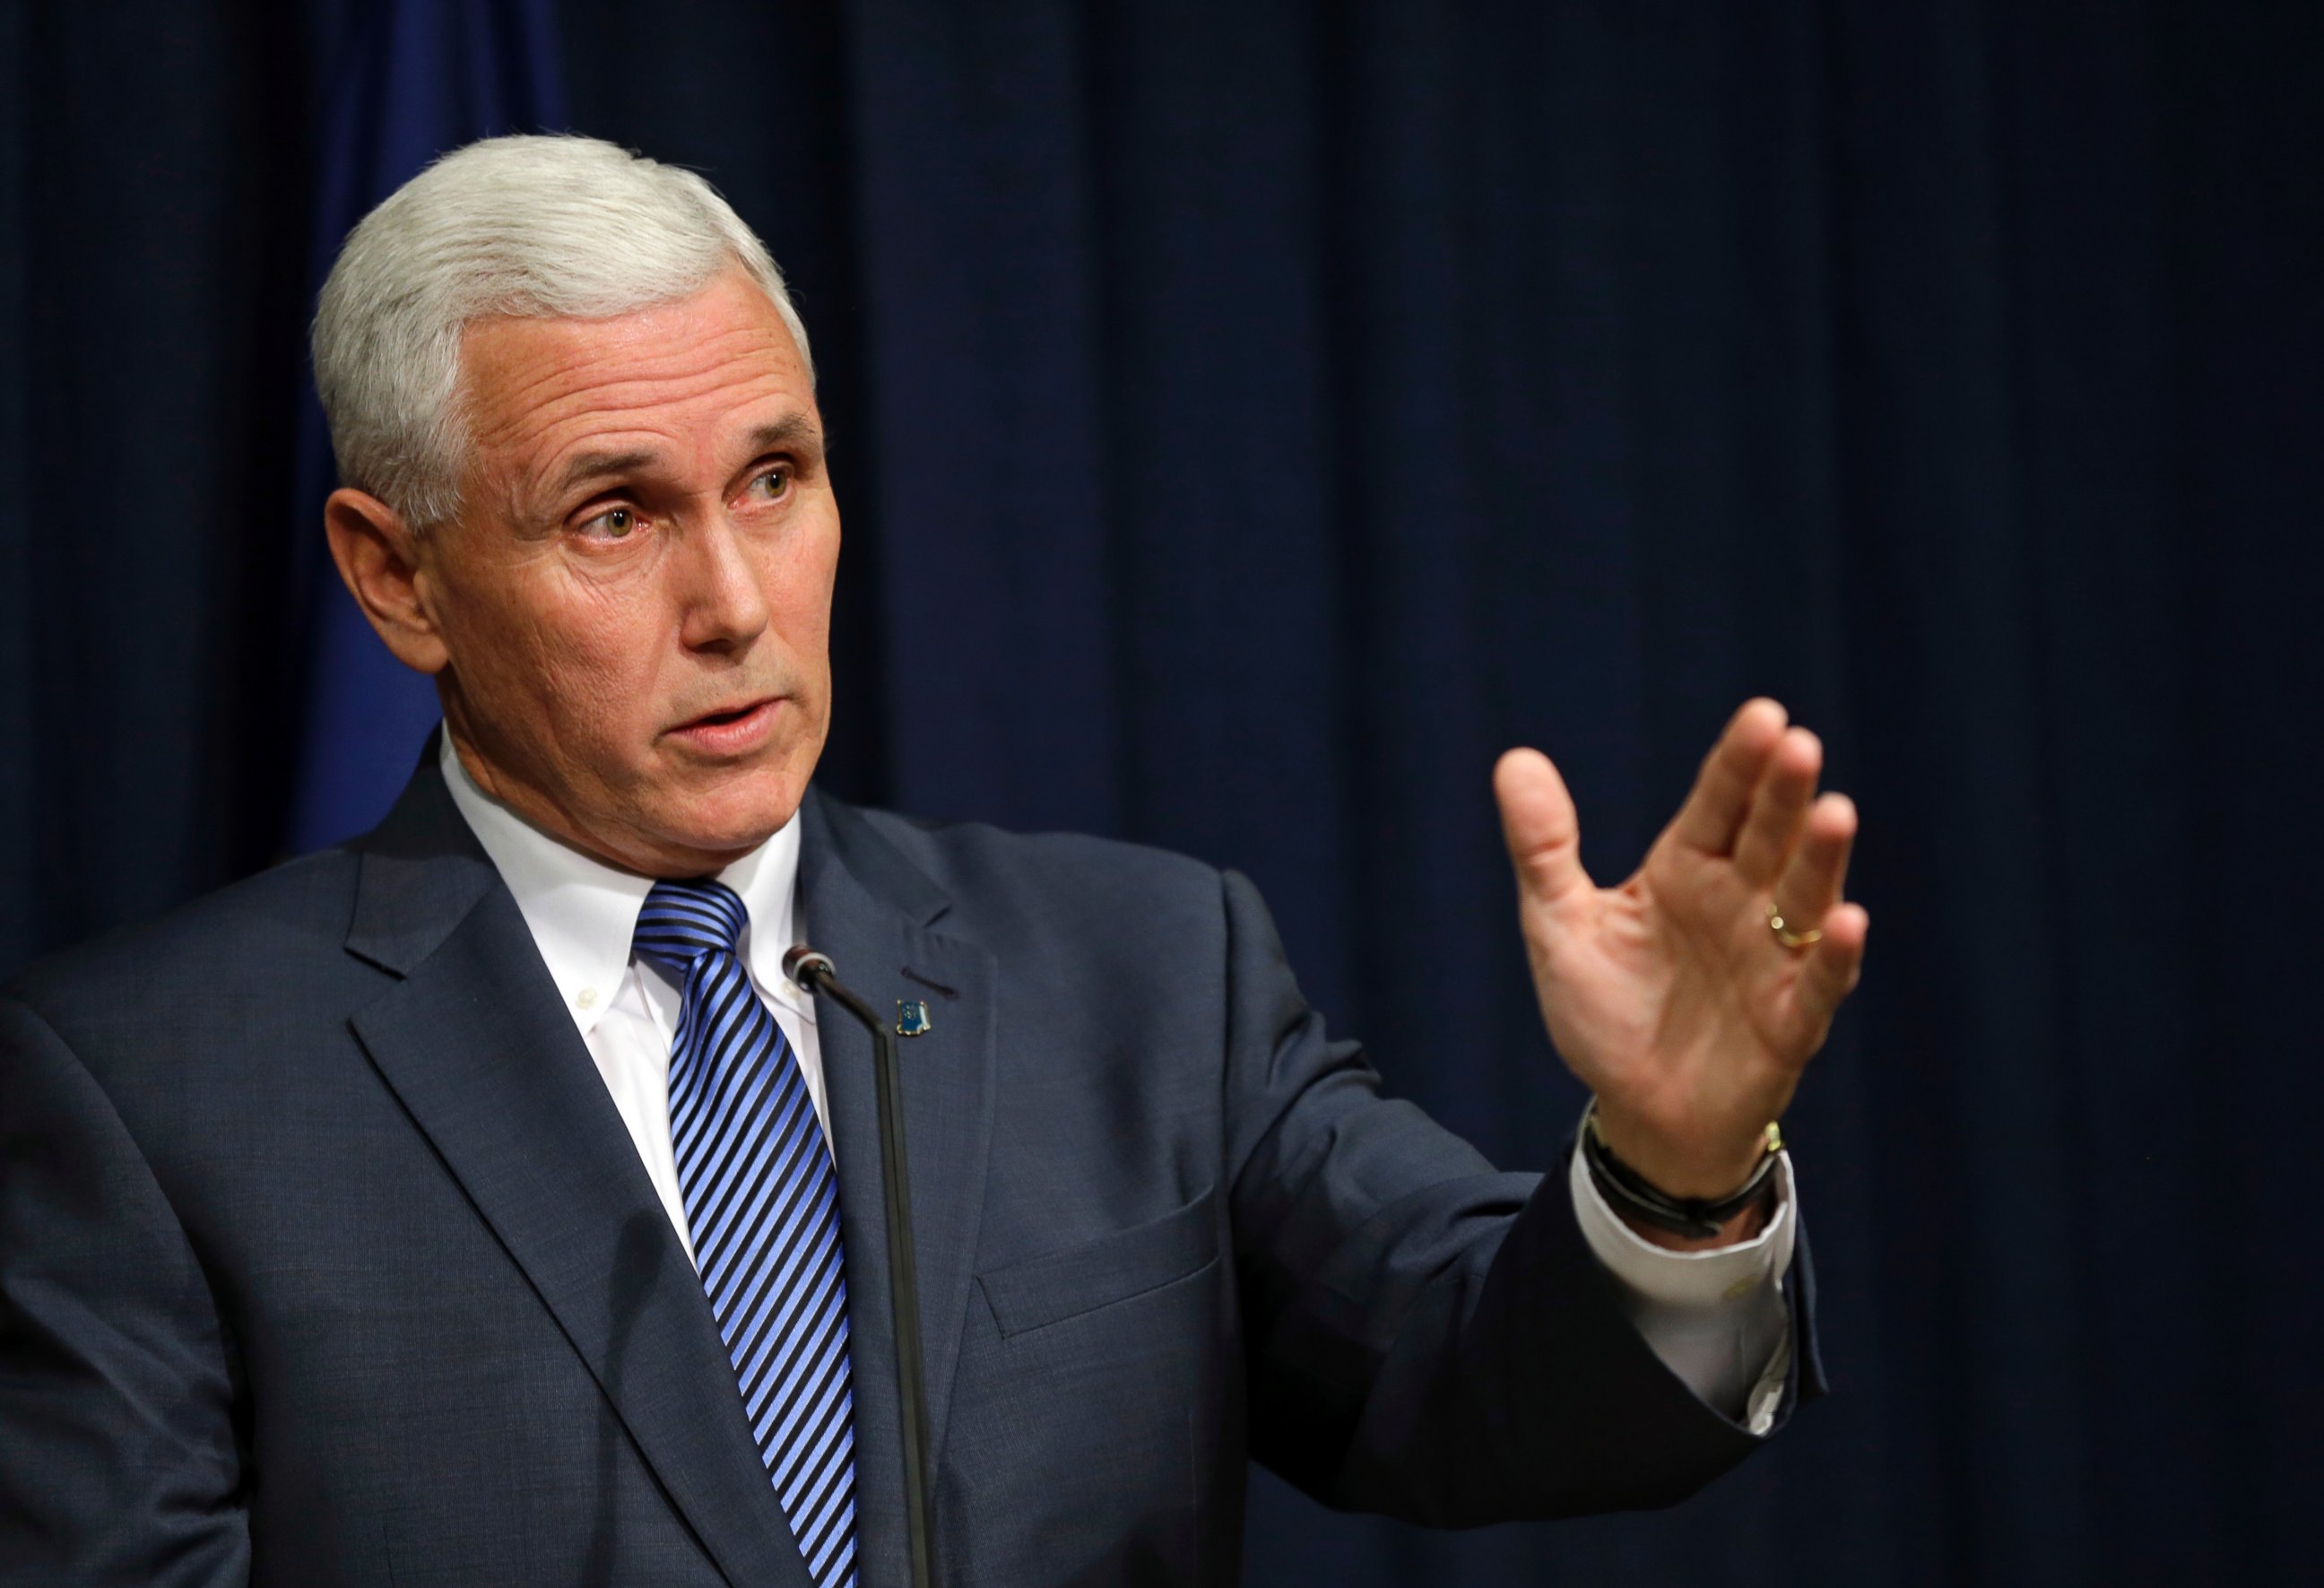 PHOTO: Indiana Gov. Mike Pence holds a news conference at the Statehouse in Indianapolis, March 26, 2015.